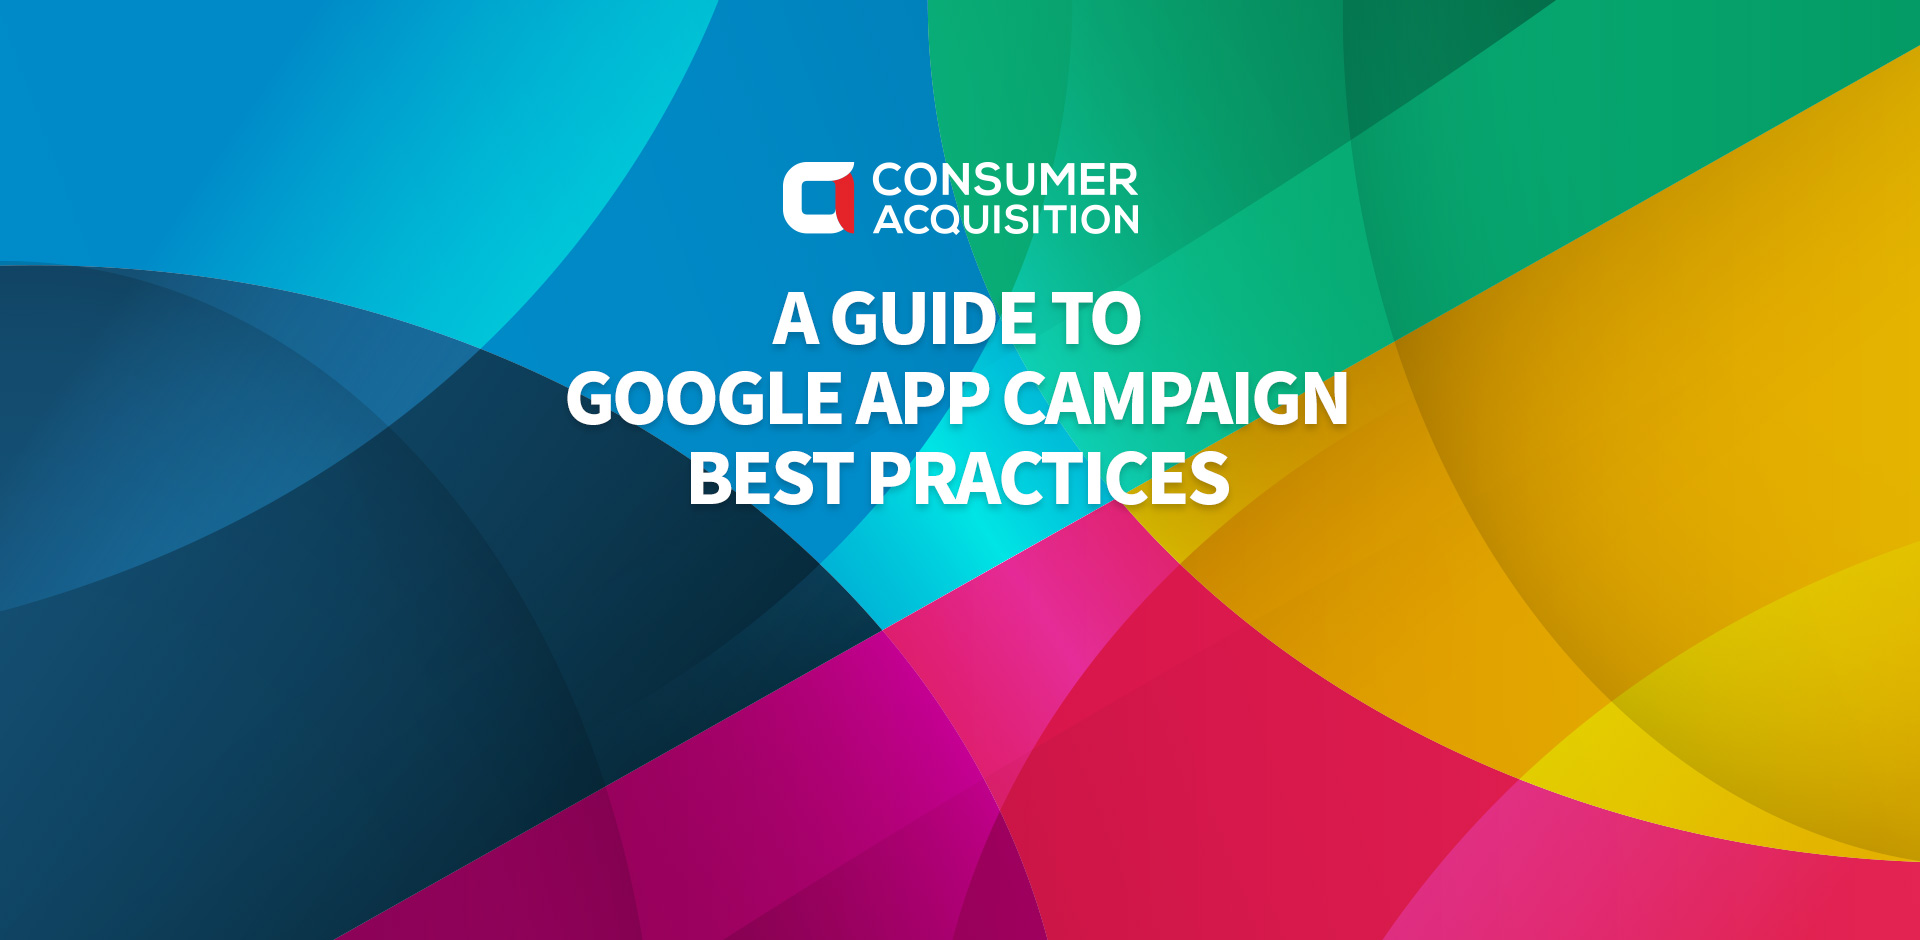 A Guide to Google App Campaign Best Practices